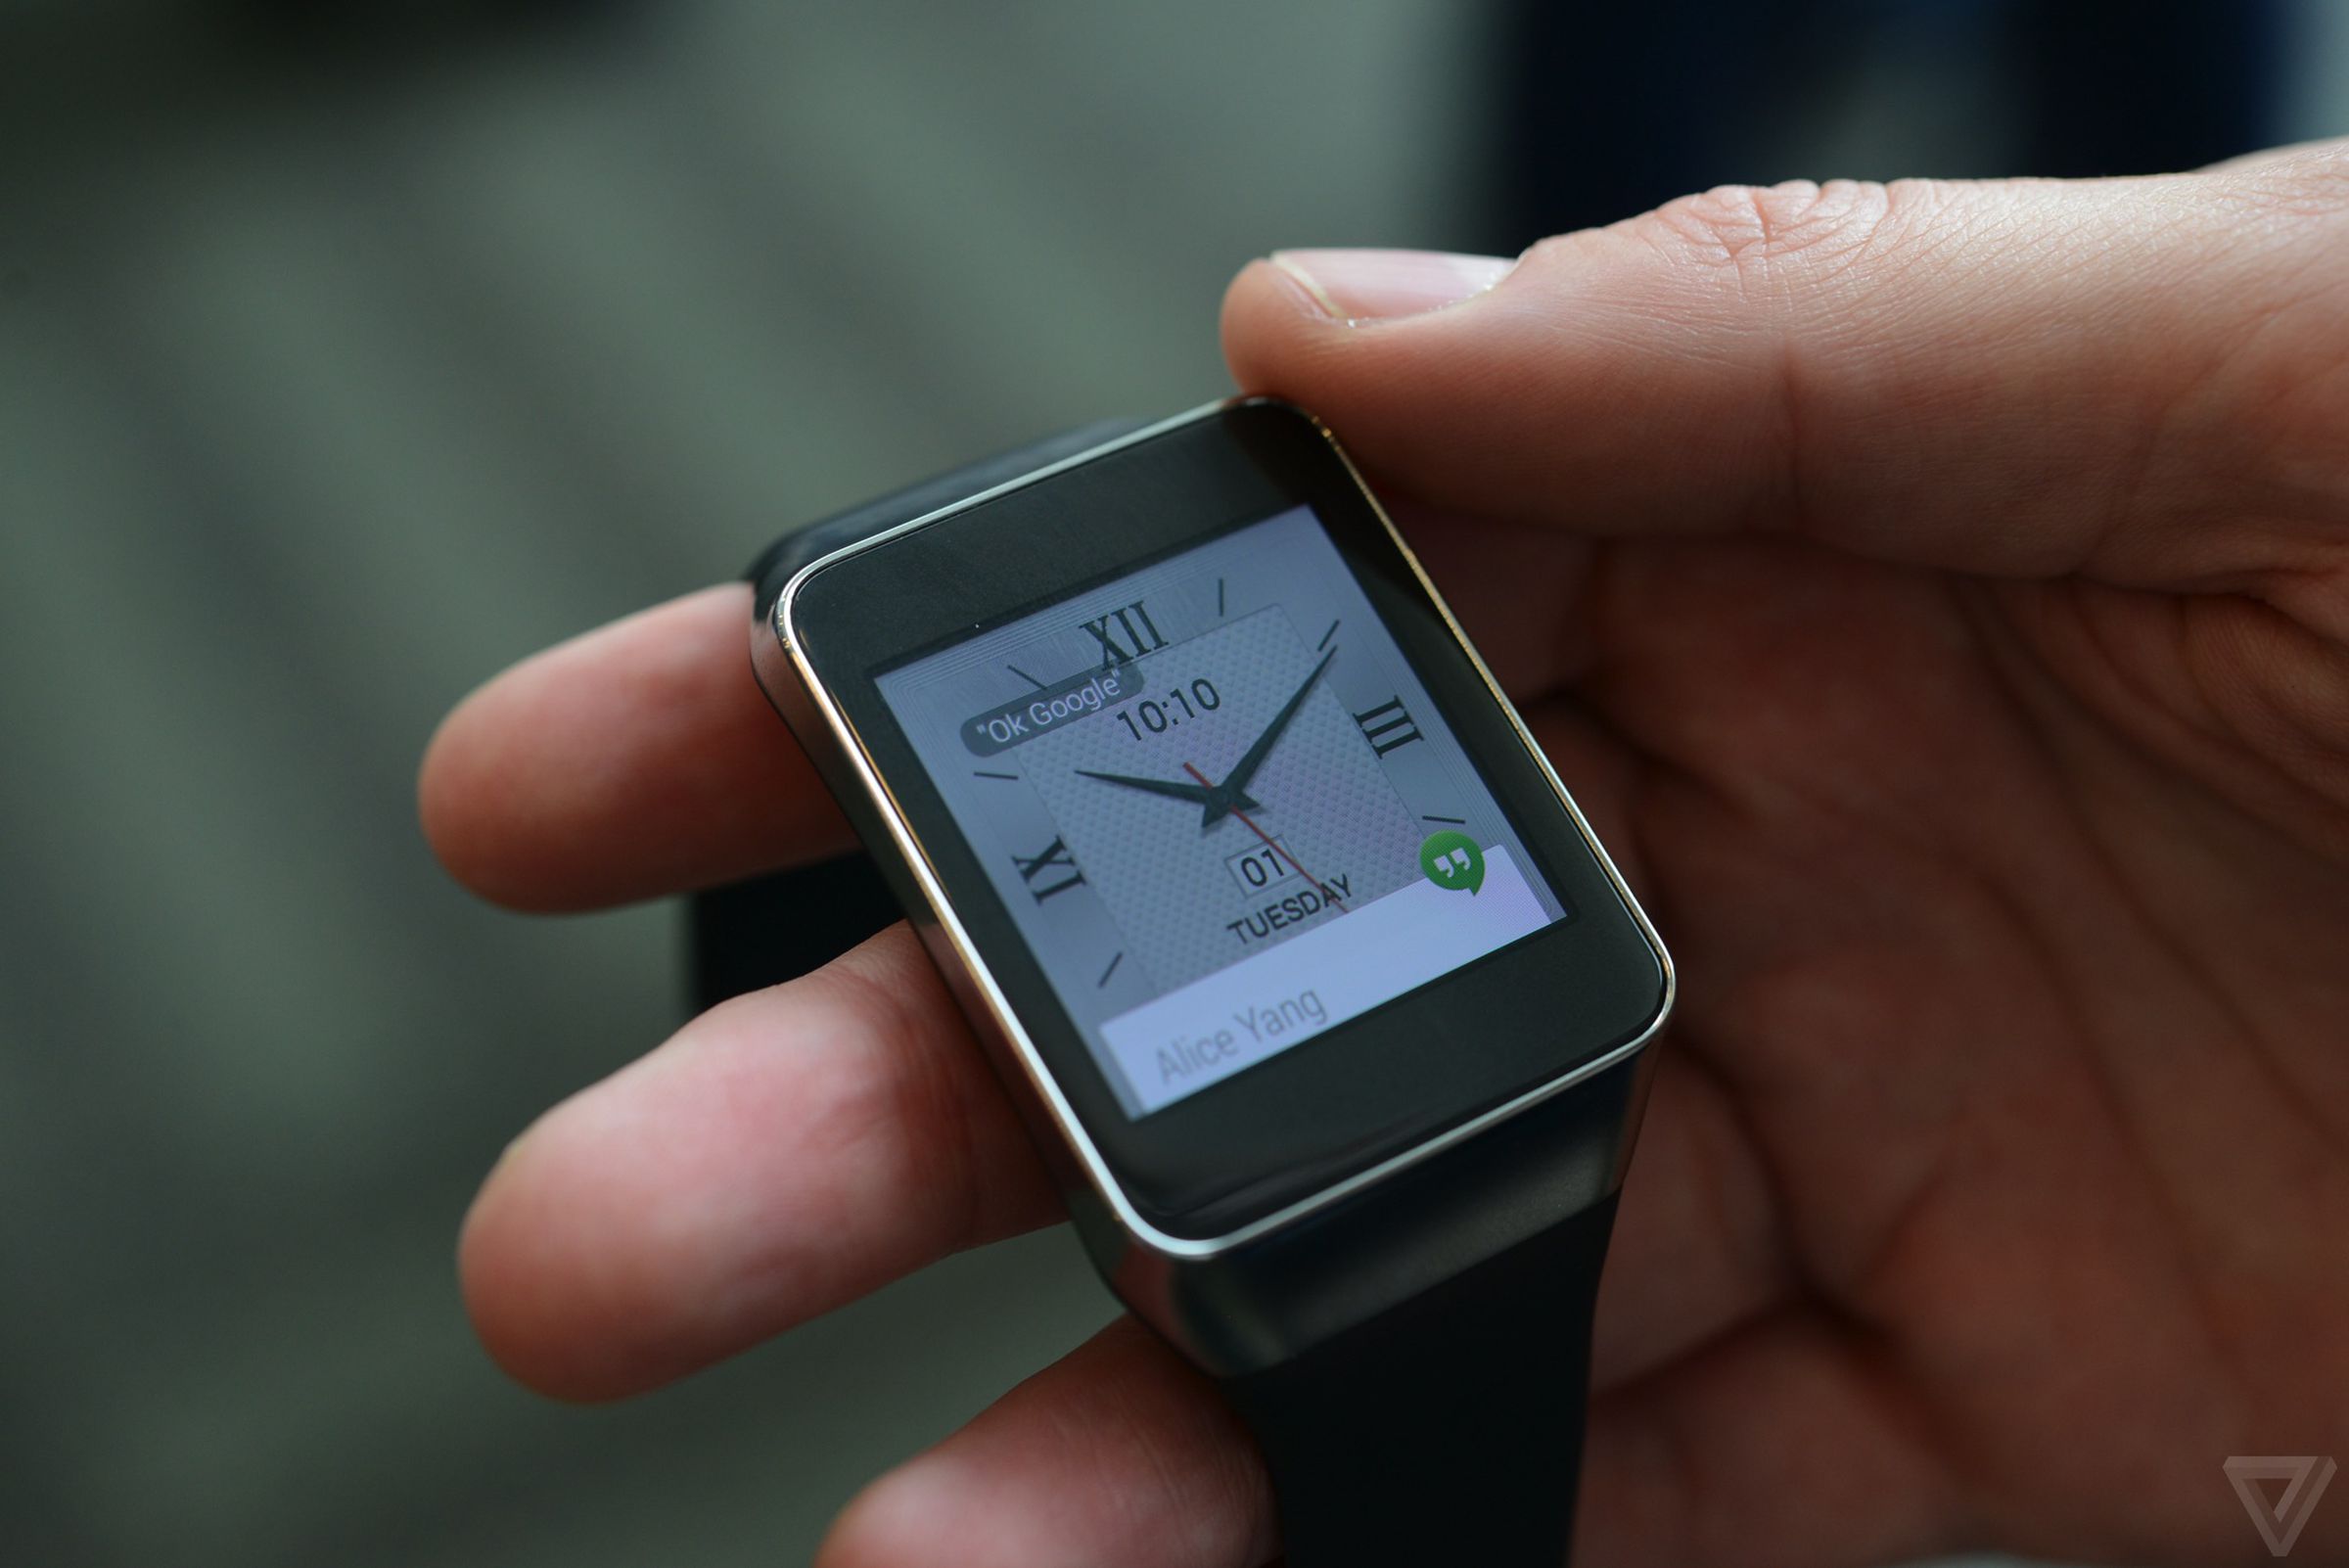 Samsung Gear Live hands-on pictures